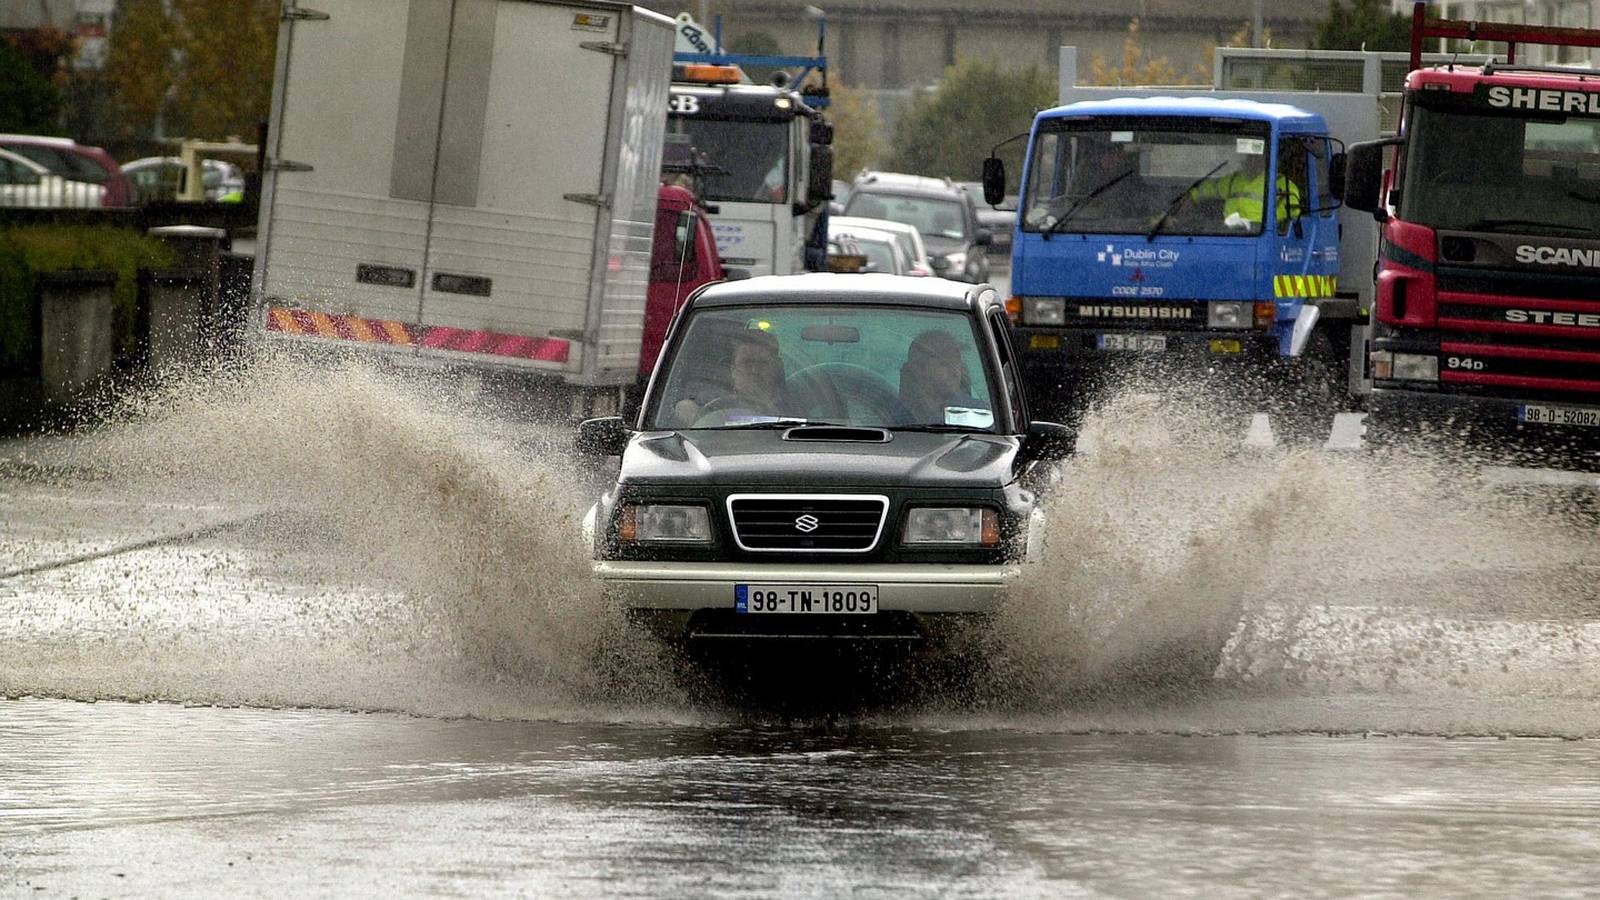 Recent years among Ireland’s wettest, 300 years of records show – The ...